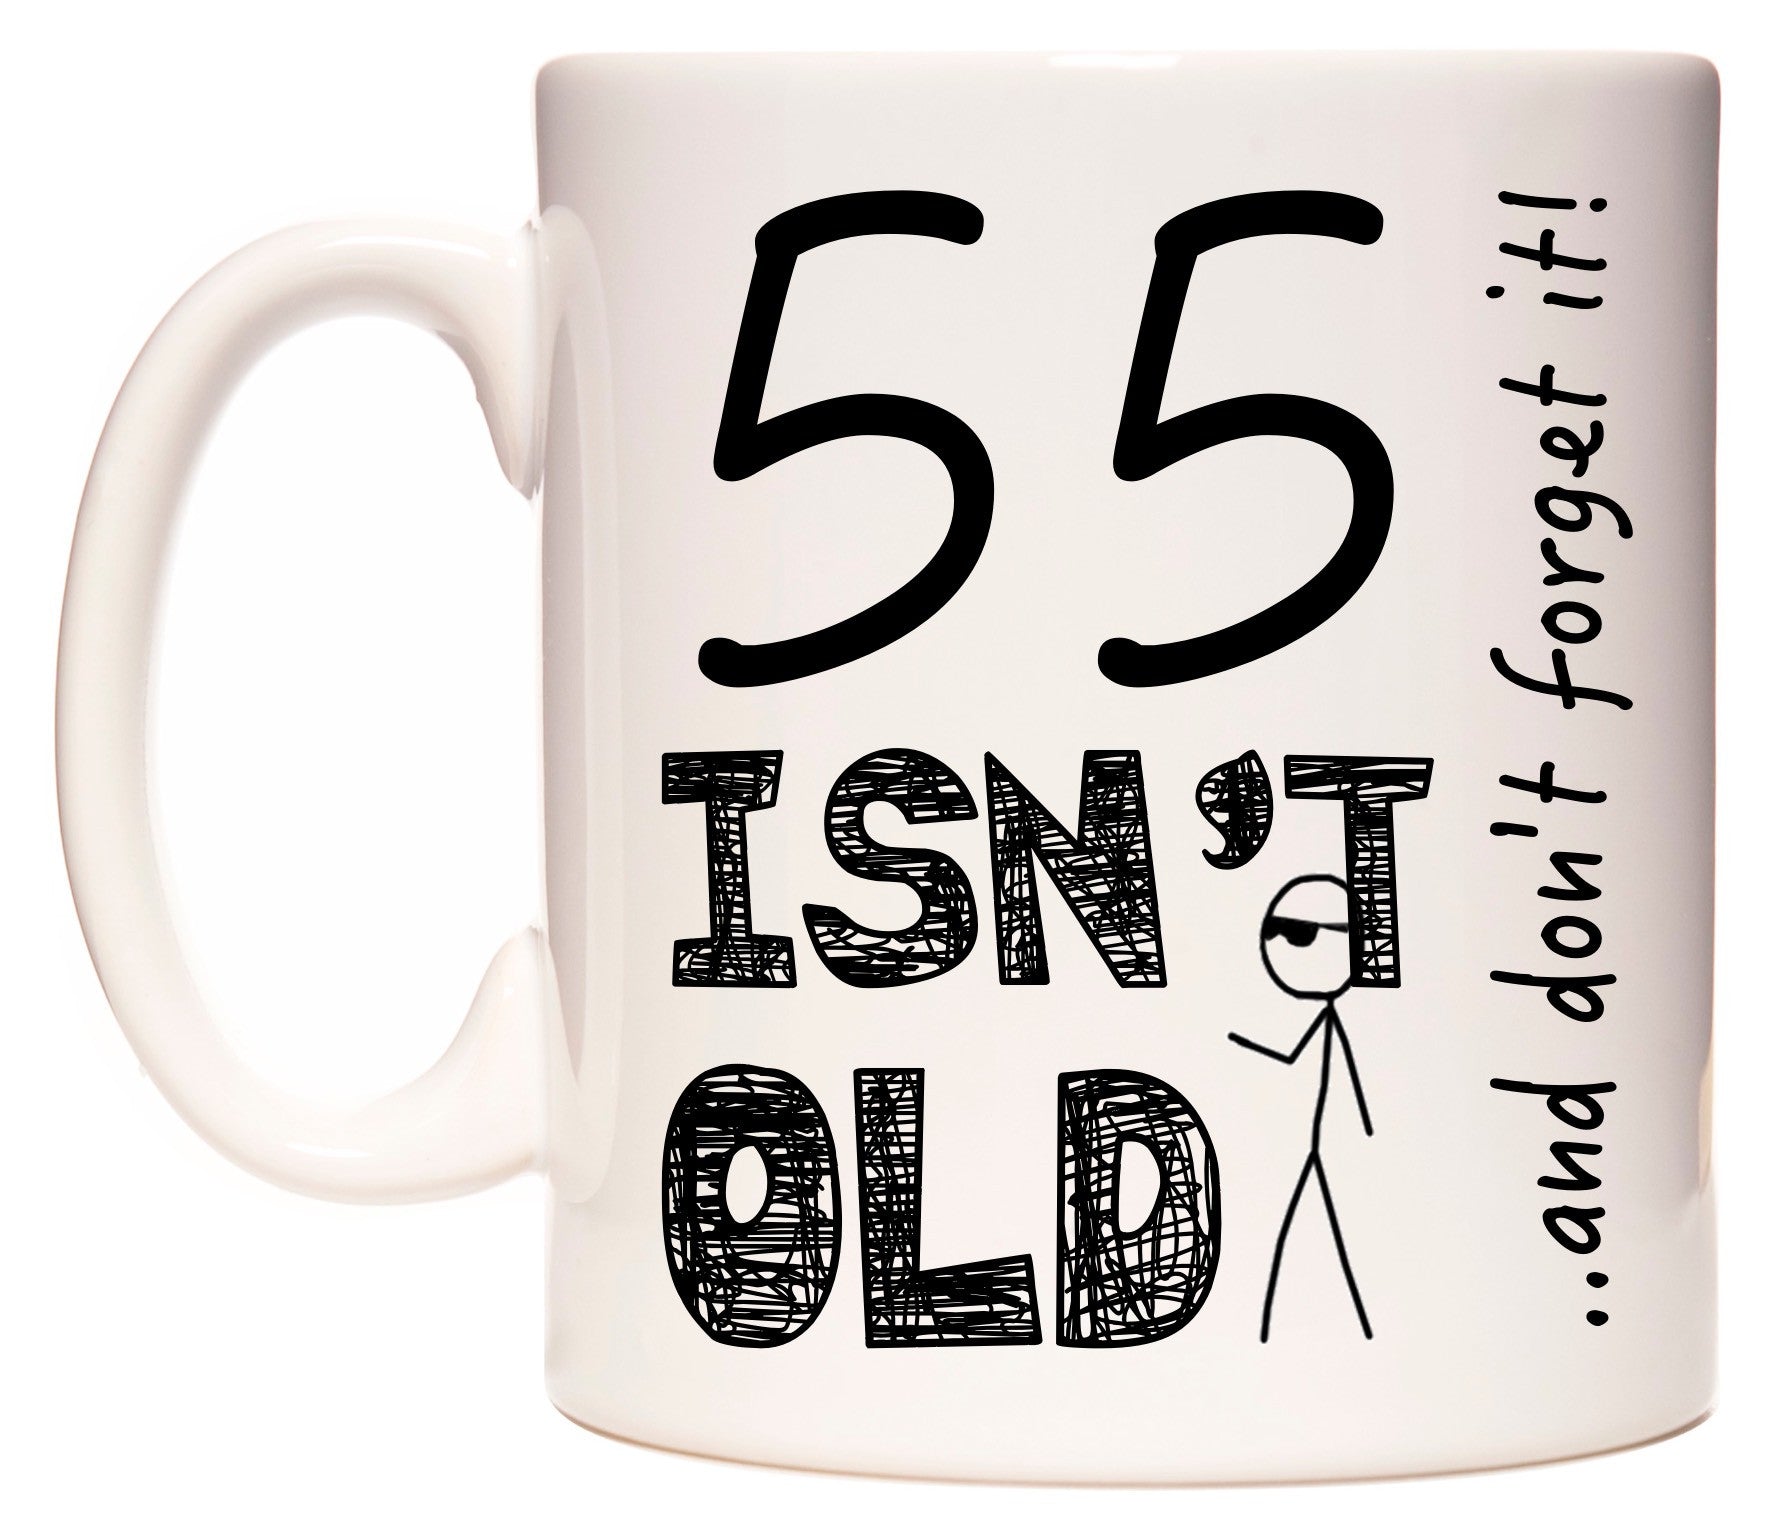 This mug features 55 Isn't Old